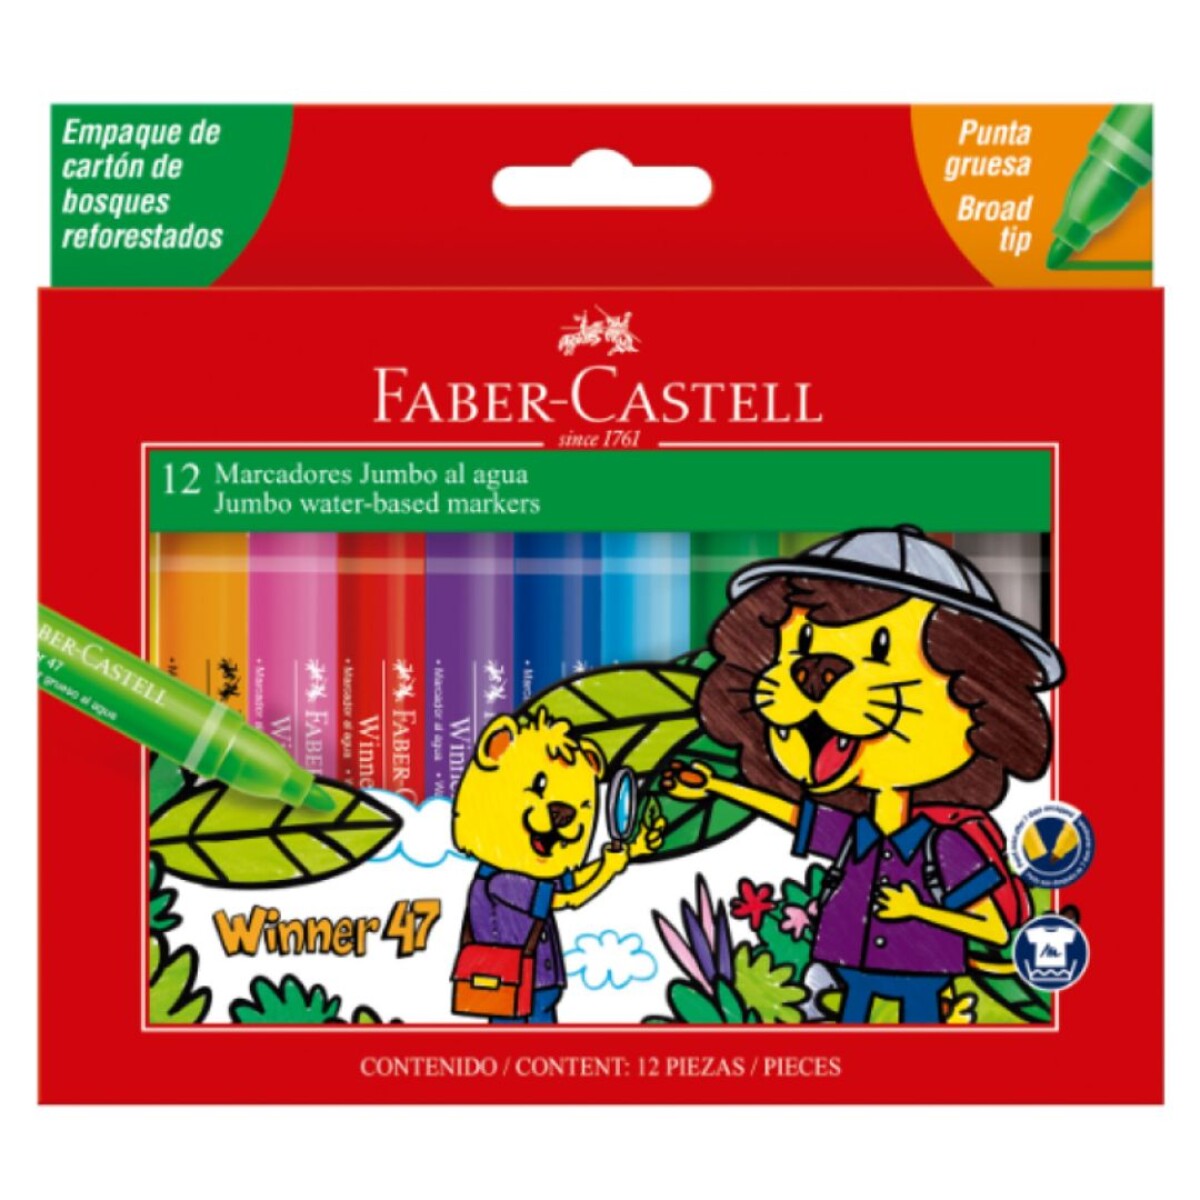 MARCADOR FABER CASTELL 31256 WINNER GRUESO X 12 COLORES 